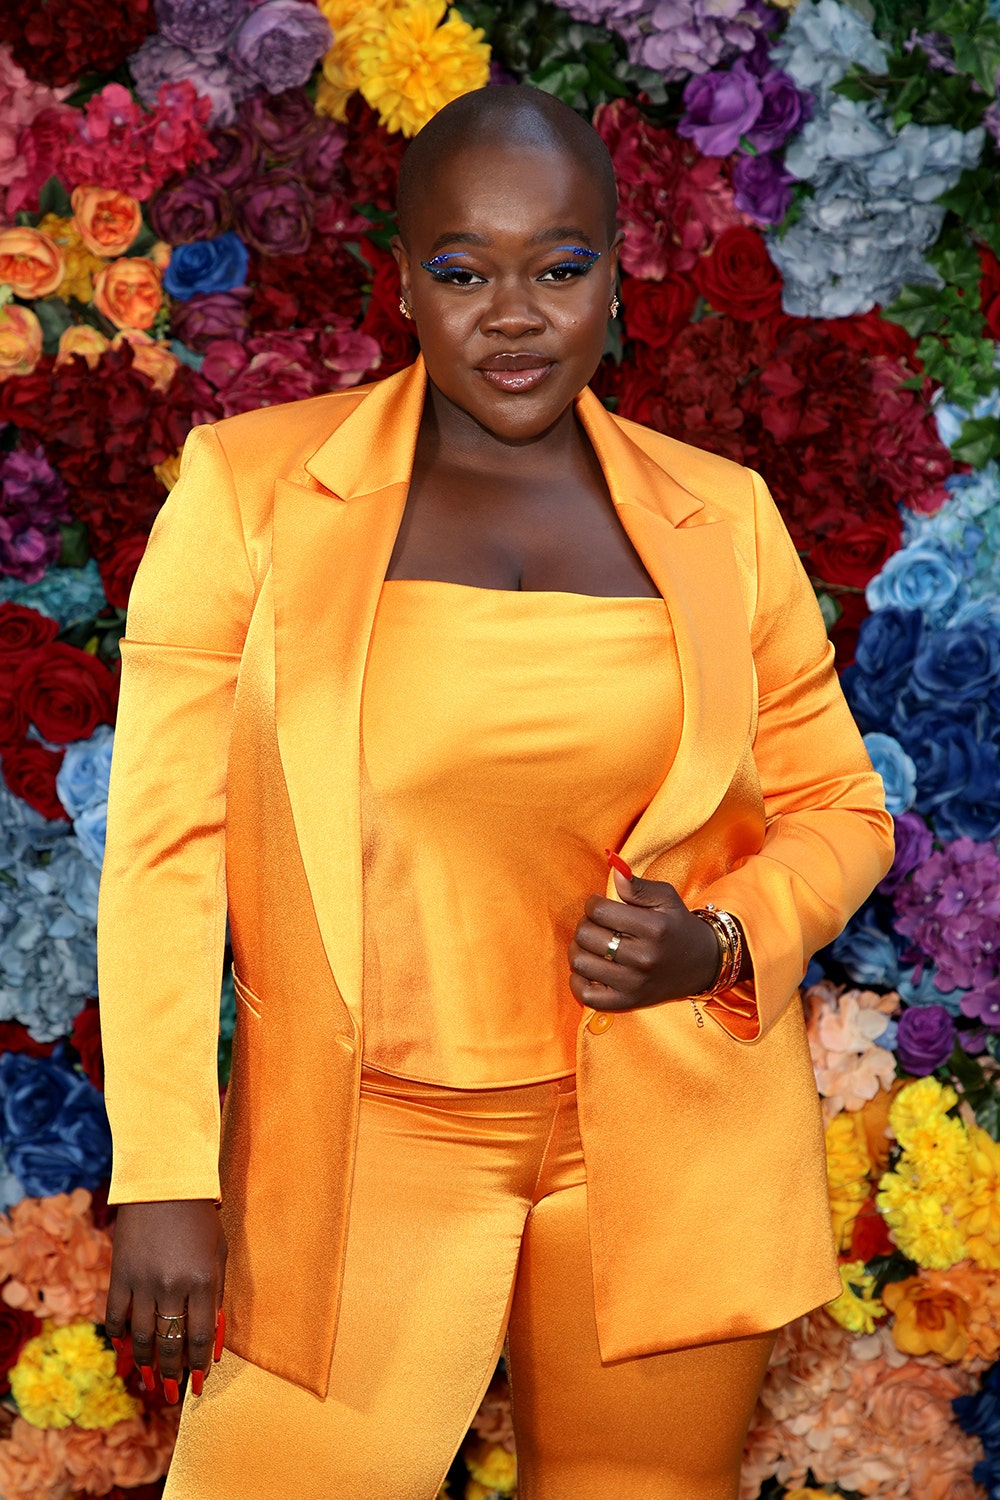 Achieng Agutu wearing a bright gold suit standing in front of a wall of flowers